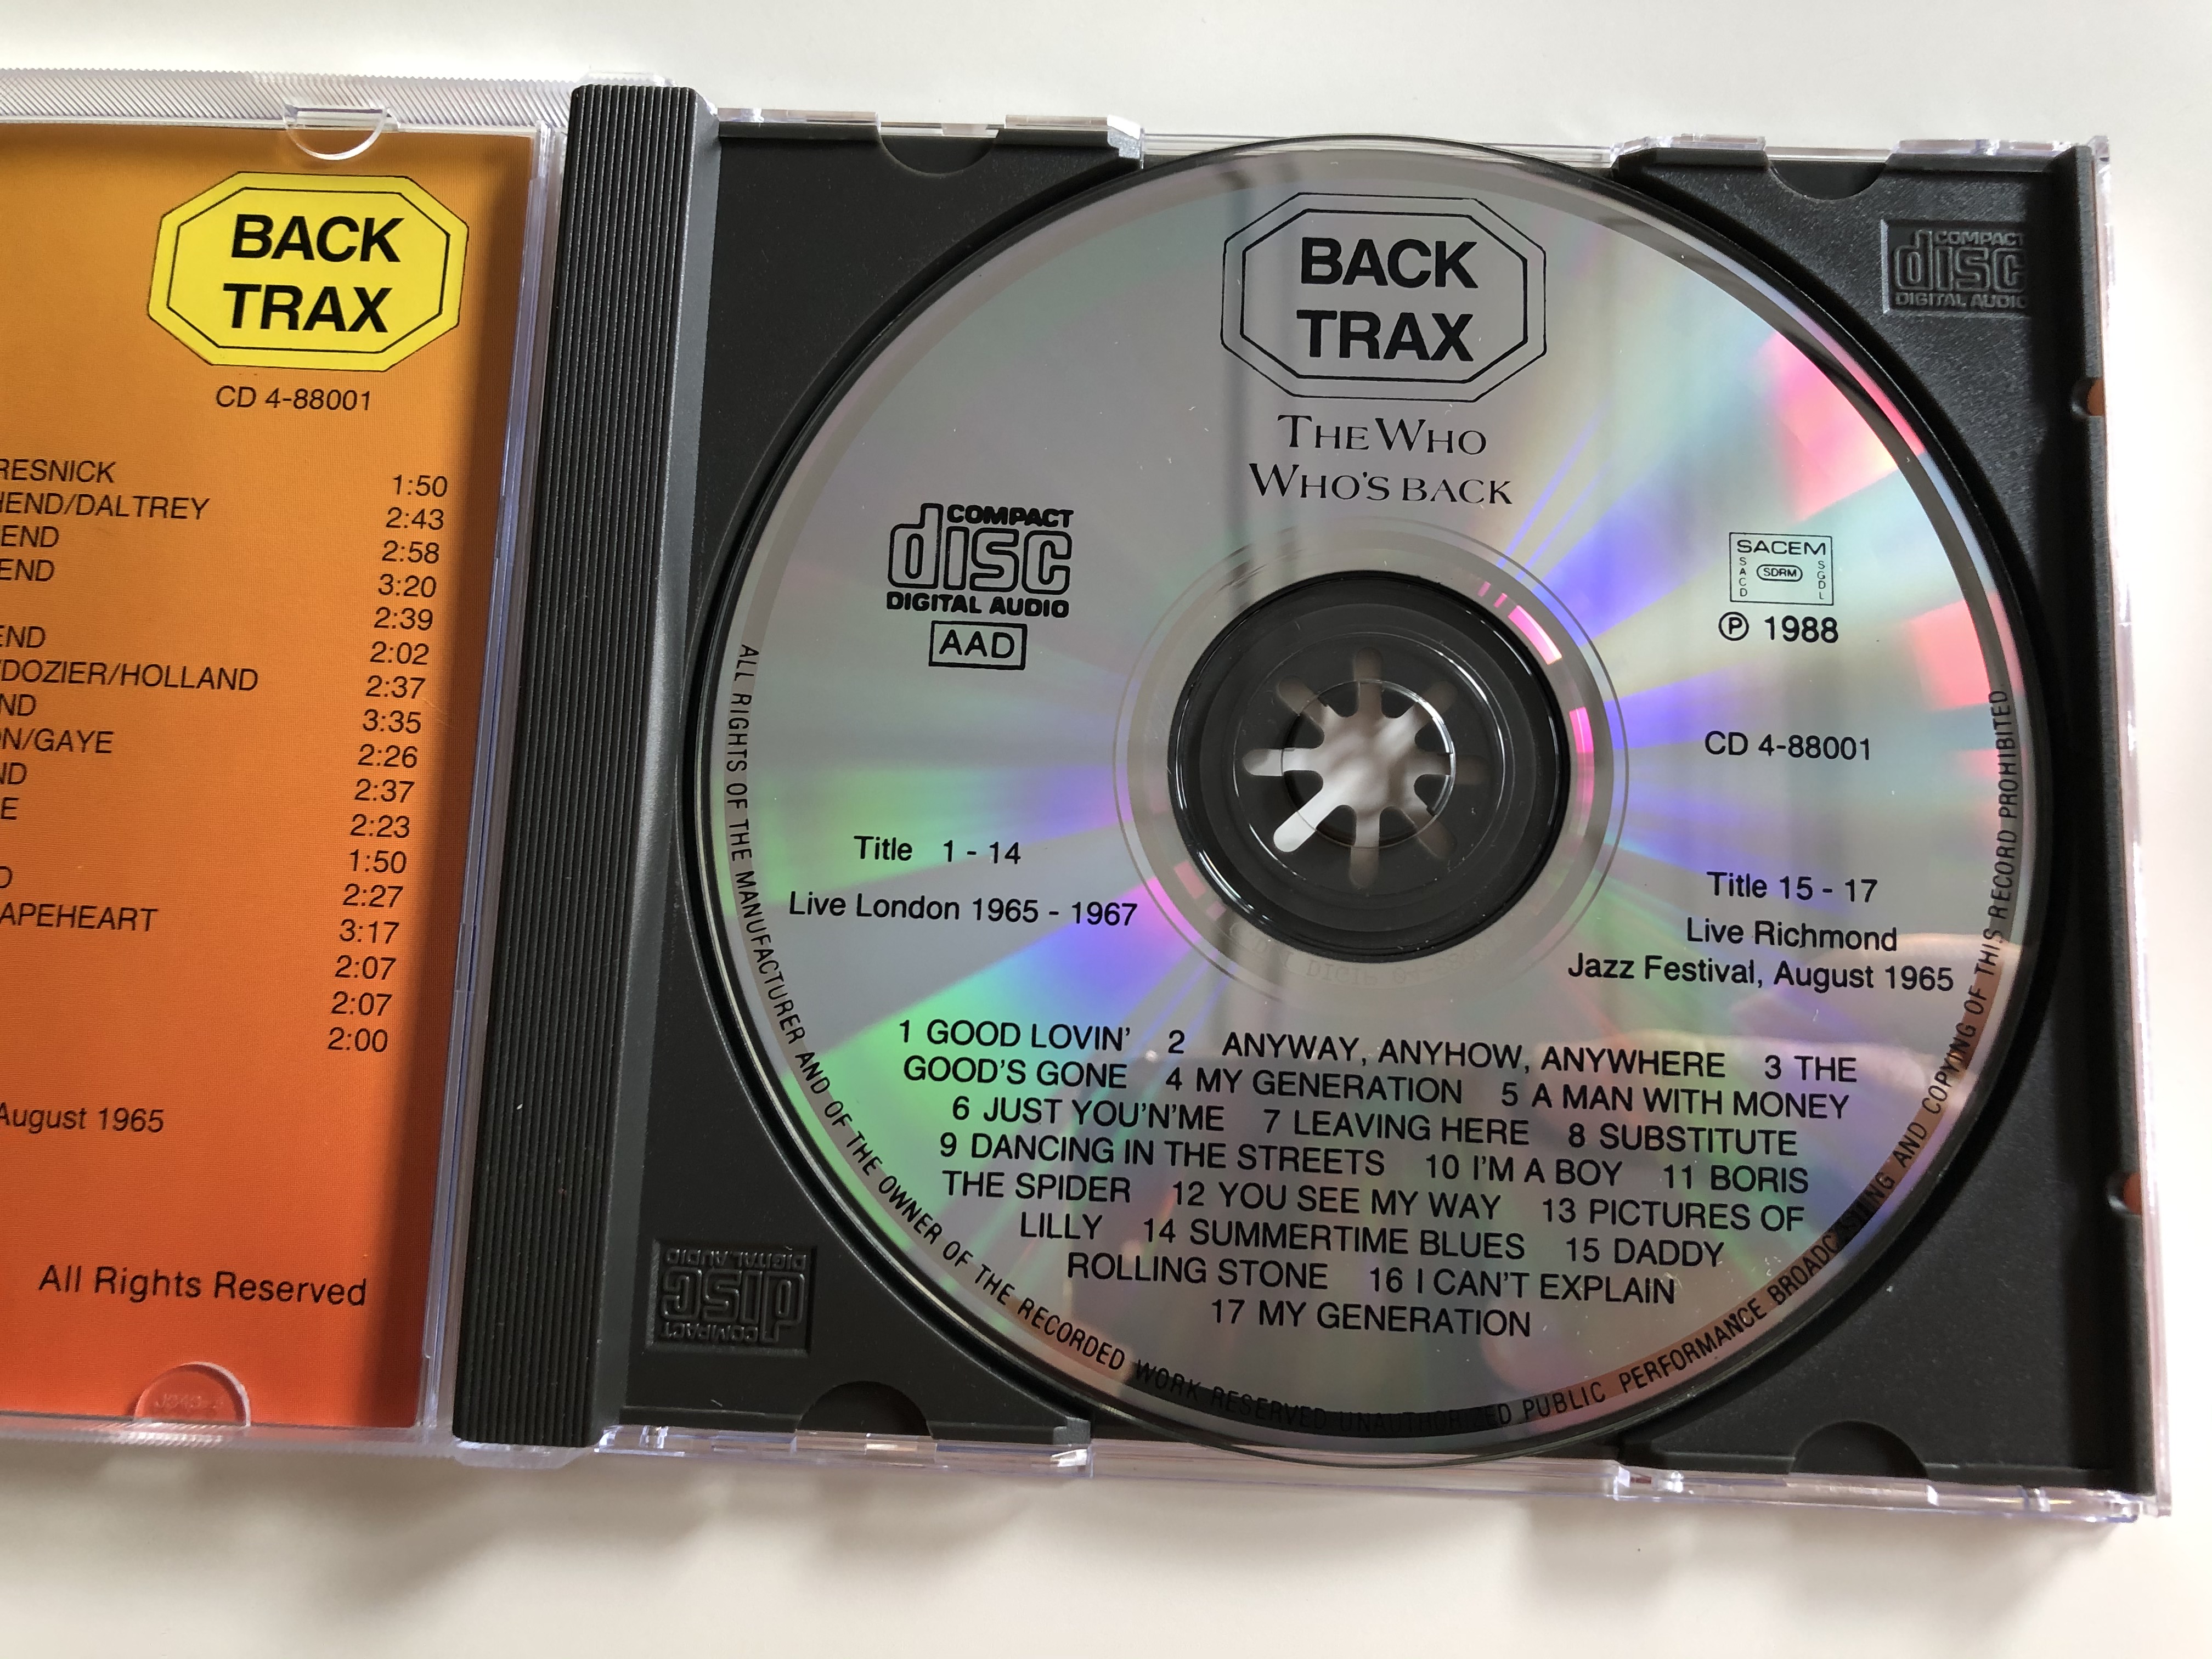 the-who-who-s-back-back-trax-audio-cd-1988-cd-04-88001-6-.jpg